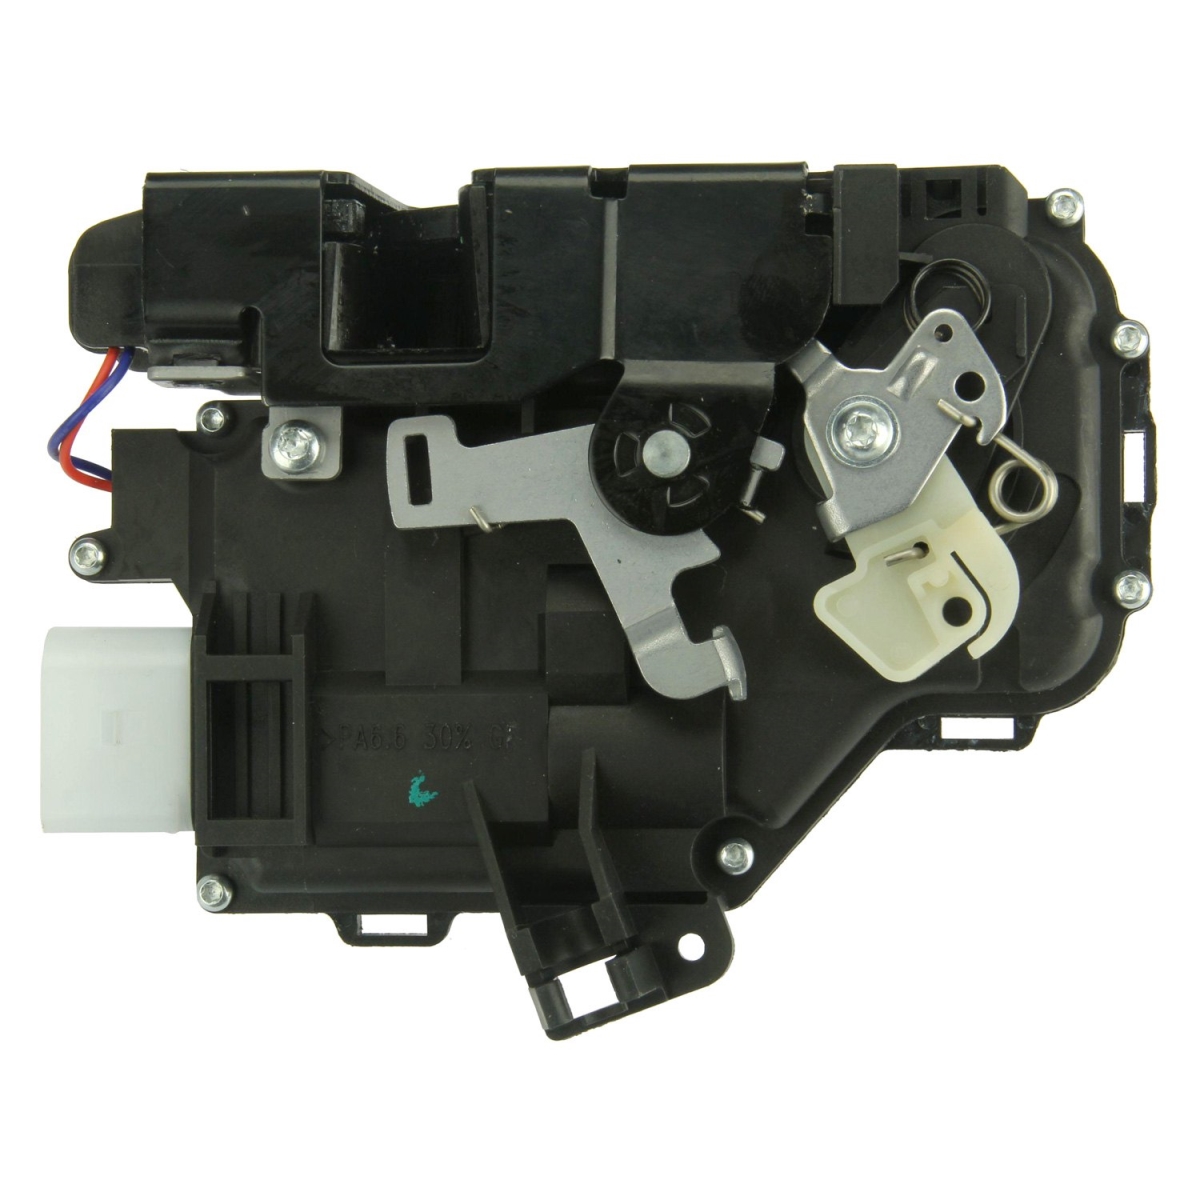 UPC 194316031268 product image for 8N1837015C Left Door Lock Actuator Assembly for 1998-2005 Porsche 911 | upcitemdb.com